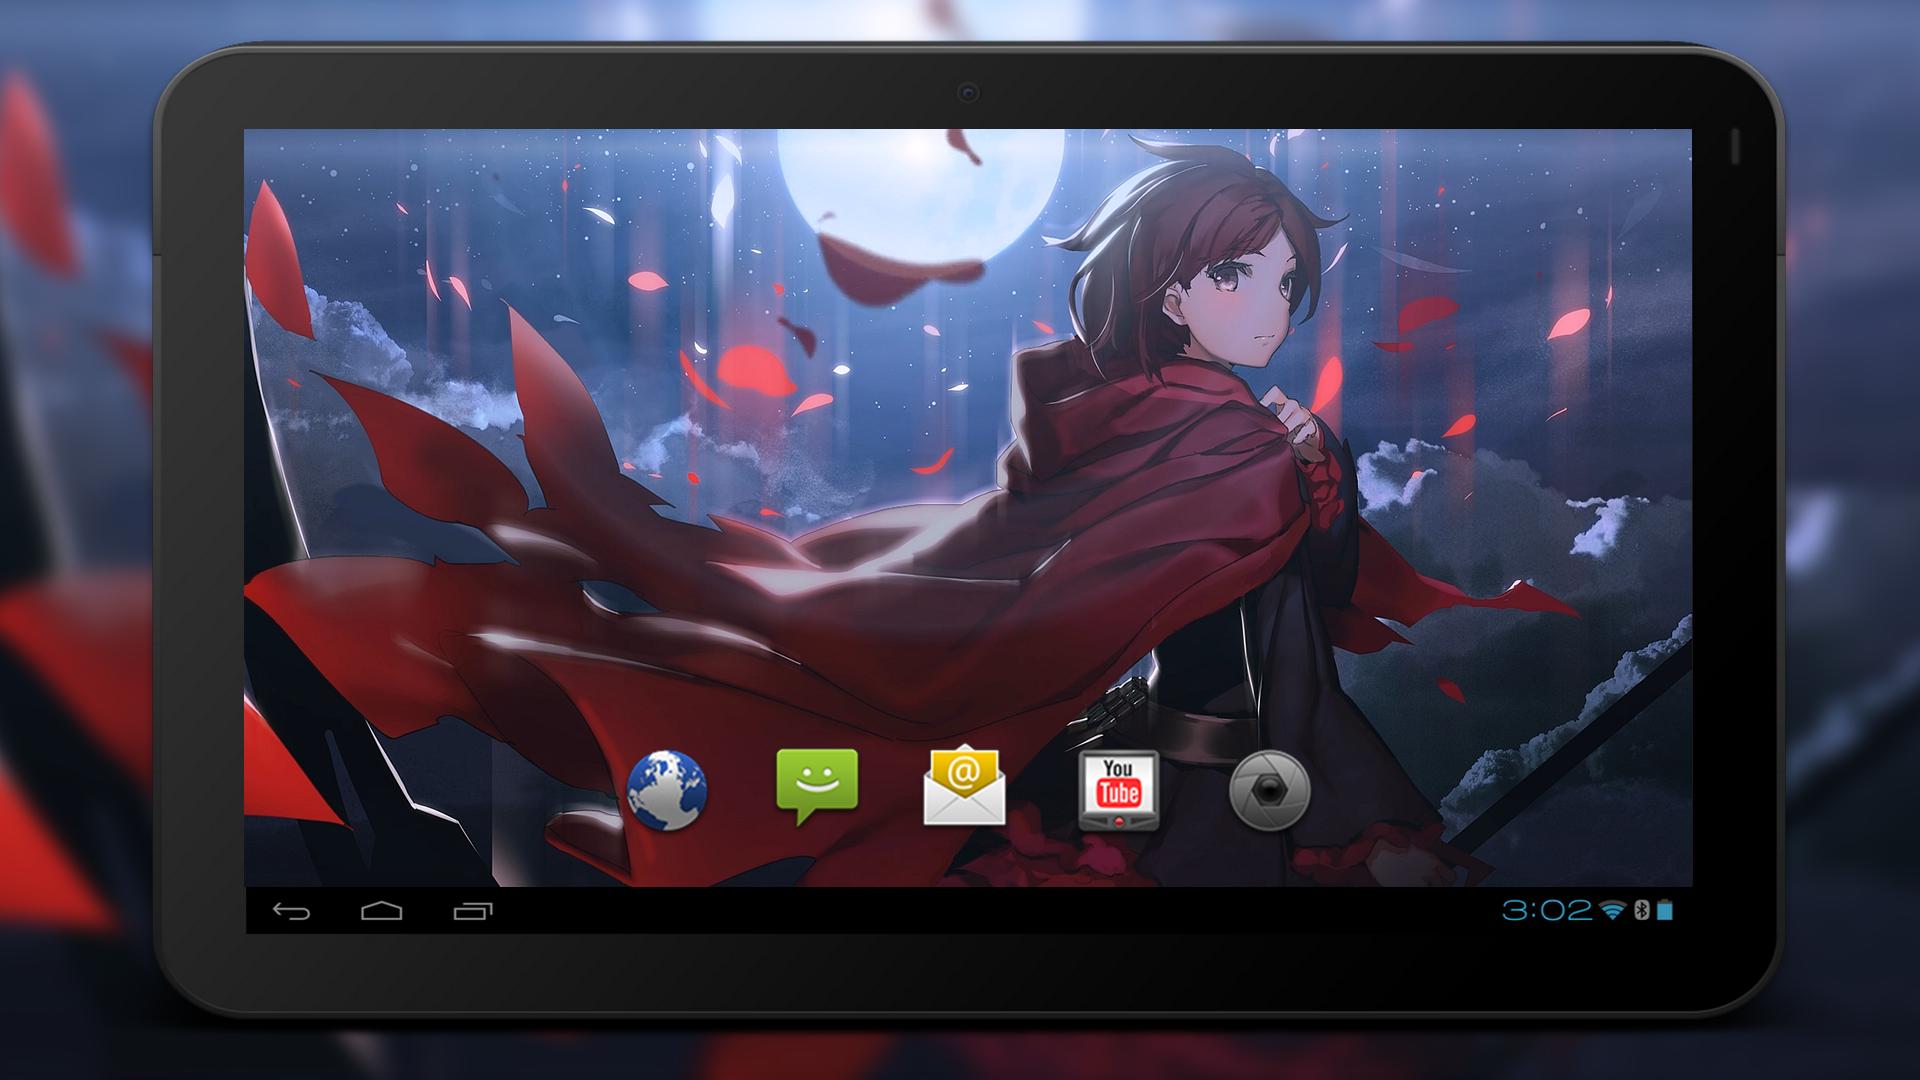 Fan Anime Live Wallpaper Of Ruby Rose For Android Apk Download